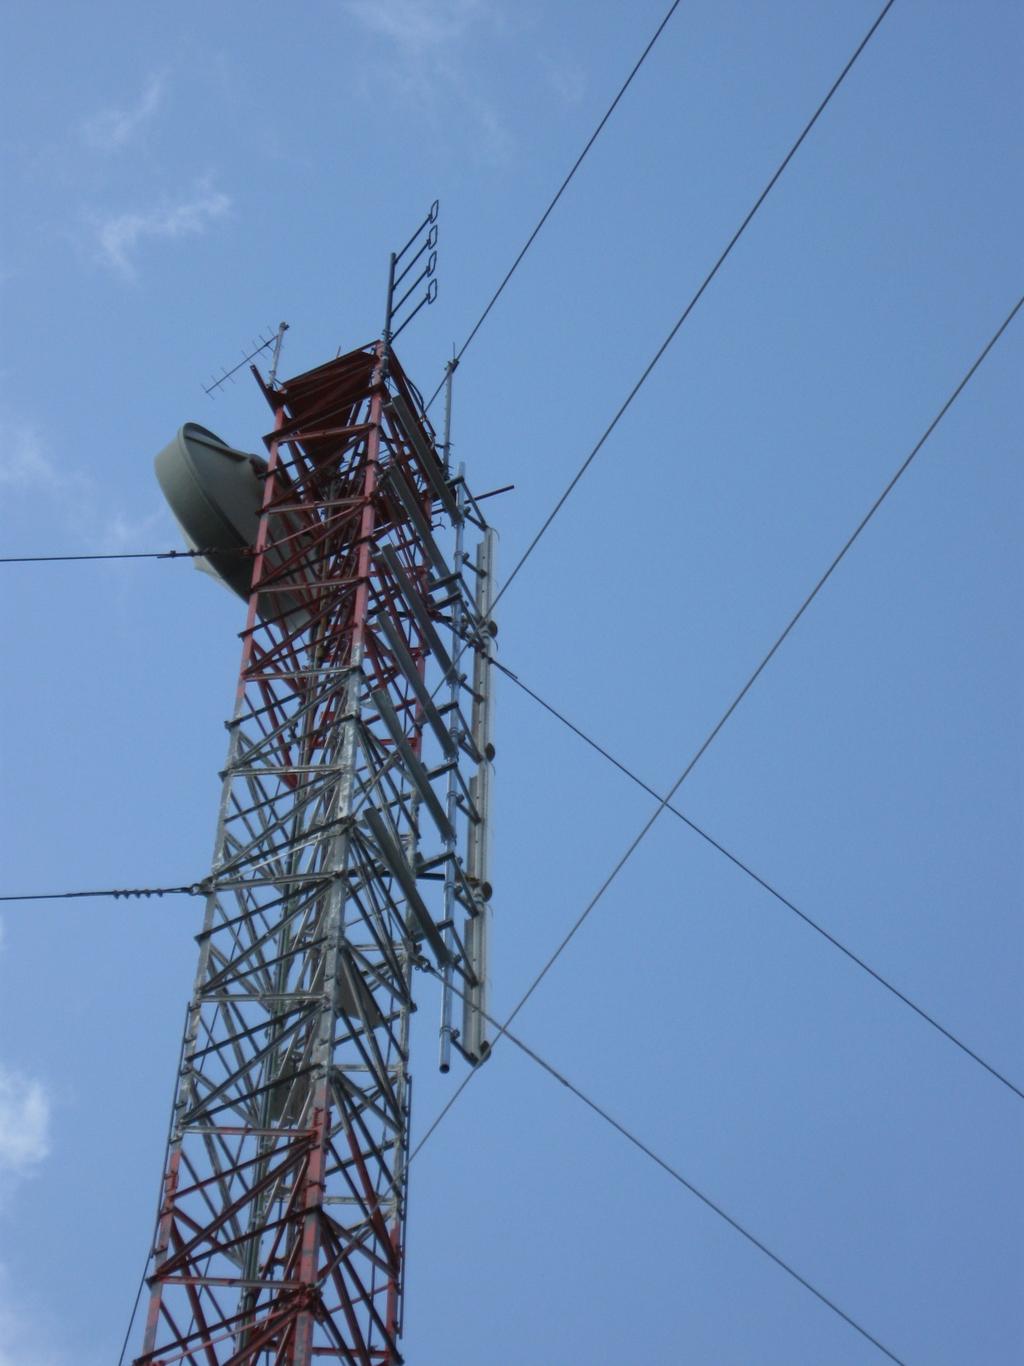 A view of the new channel 46 digital antenna on the right side